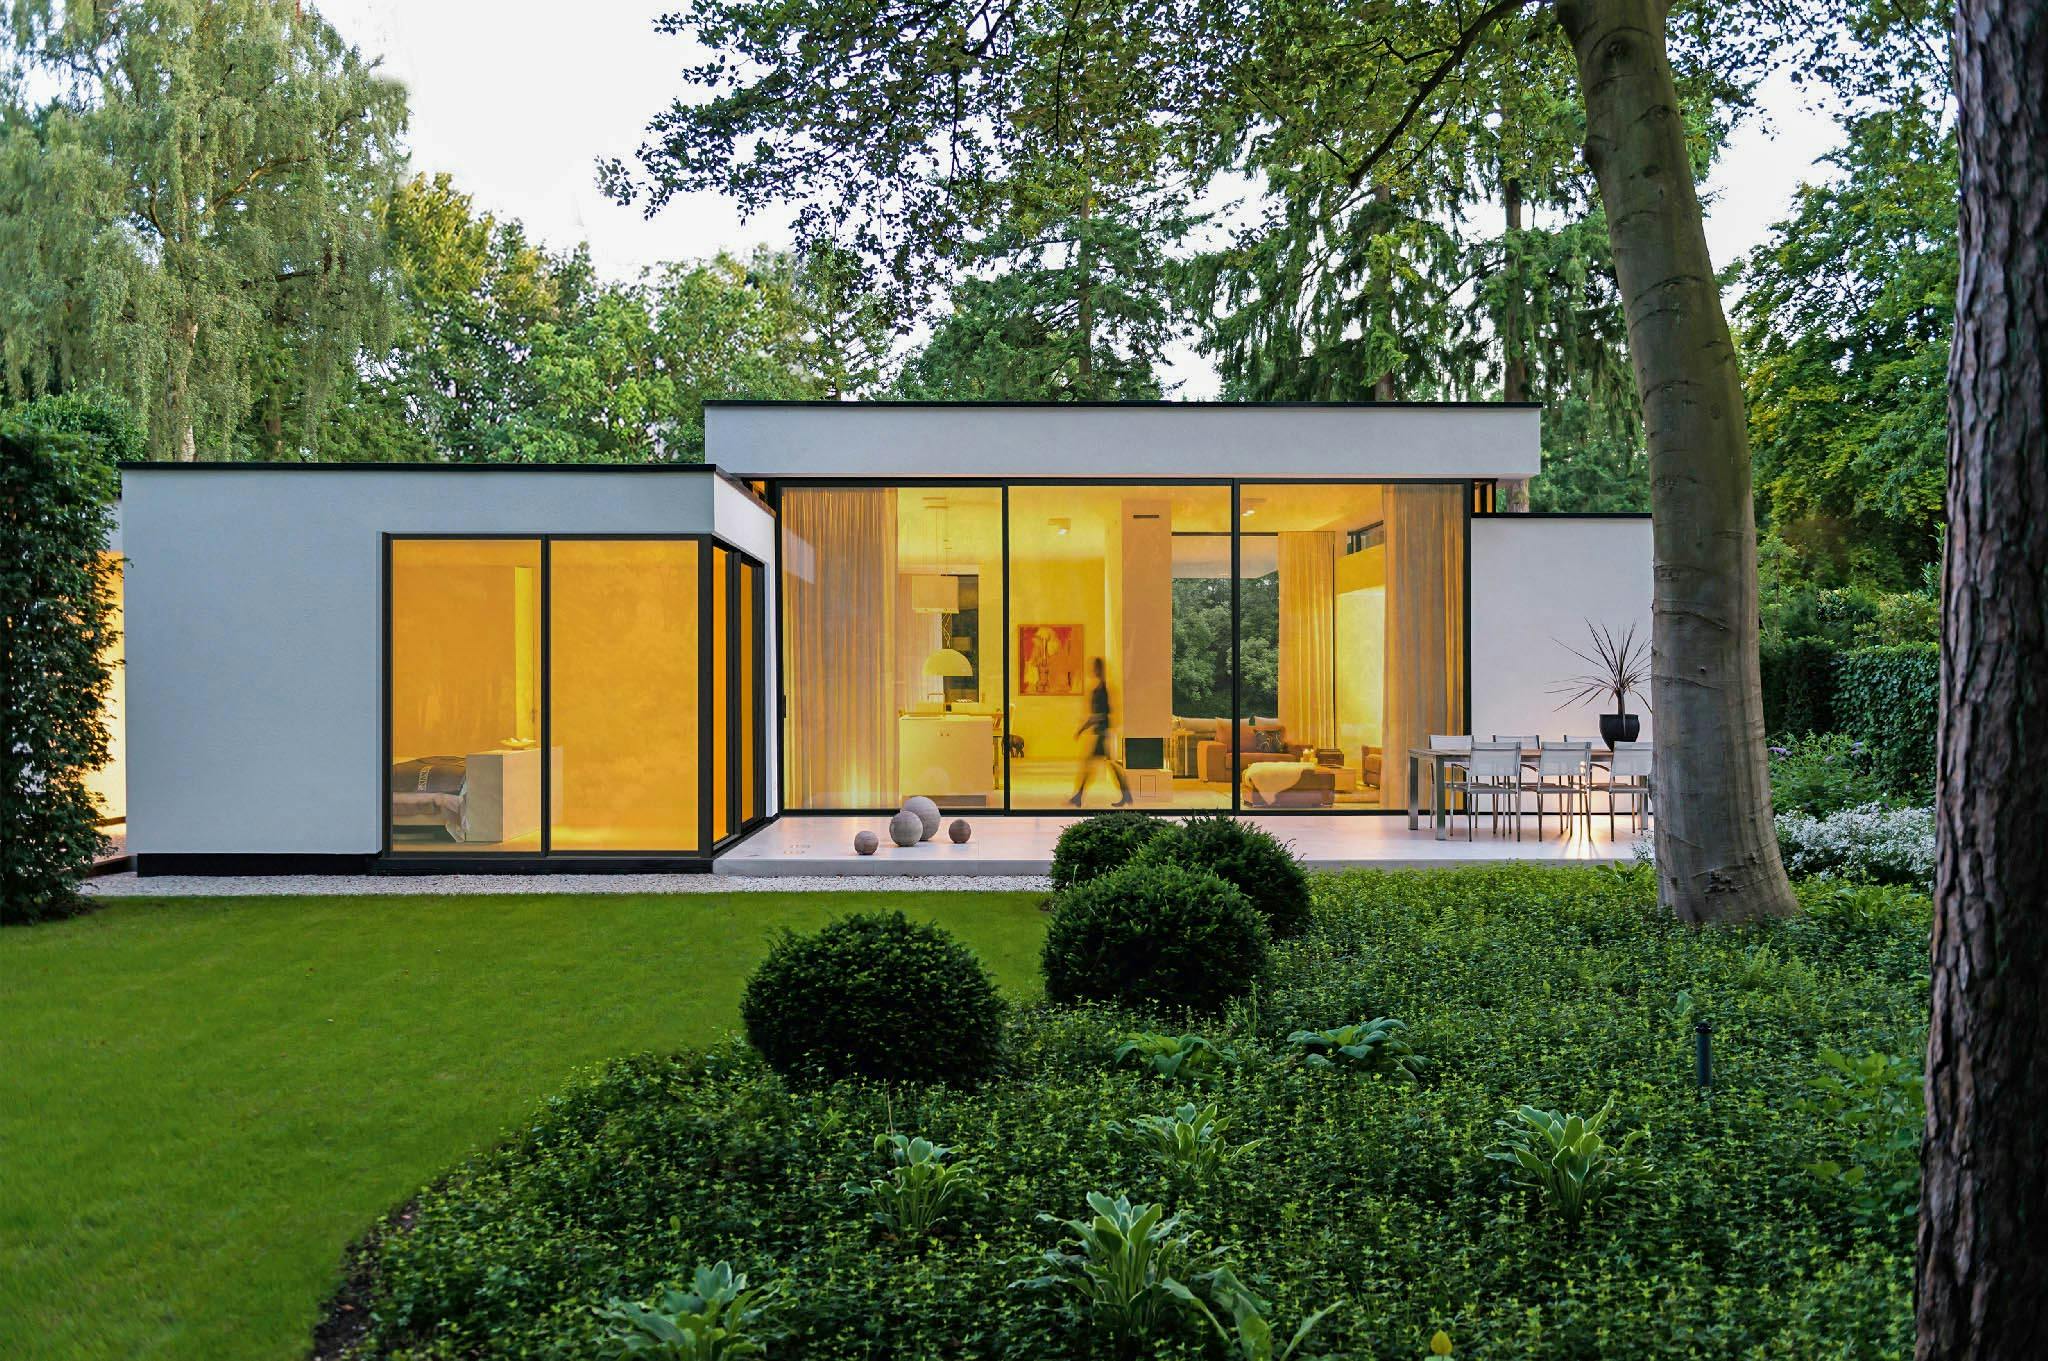 floor to ceiling exterior moving glass walls